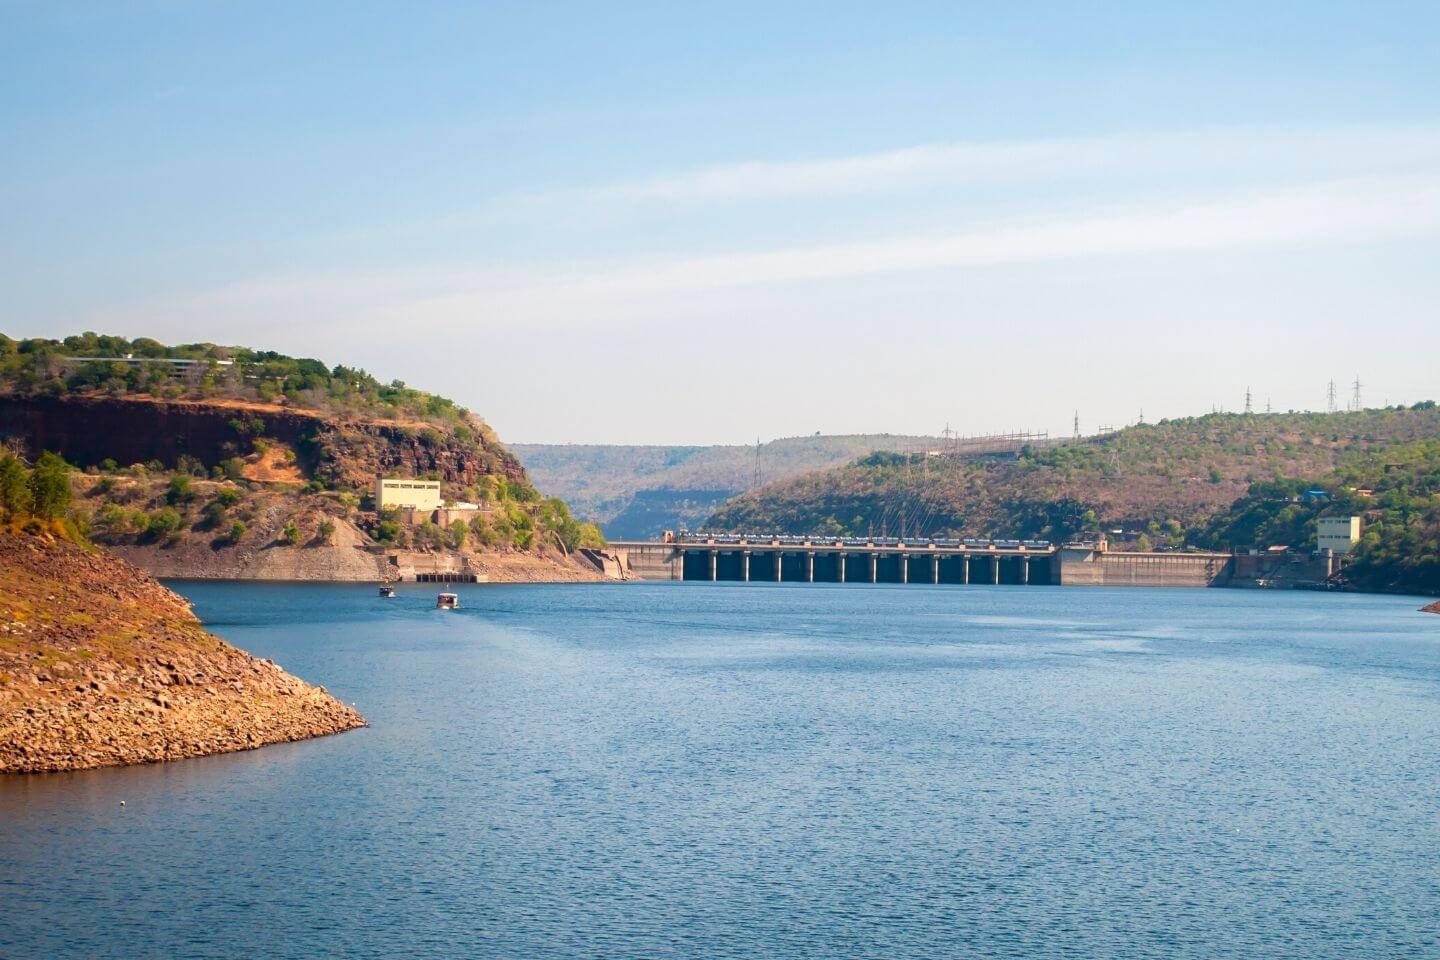 Srisailam Mallikarjuna Tourist Spot near Hyderabad to visit with family within 300 km